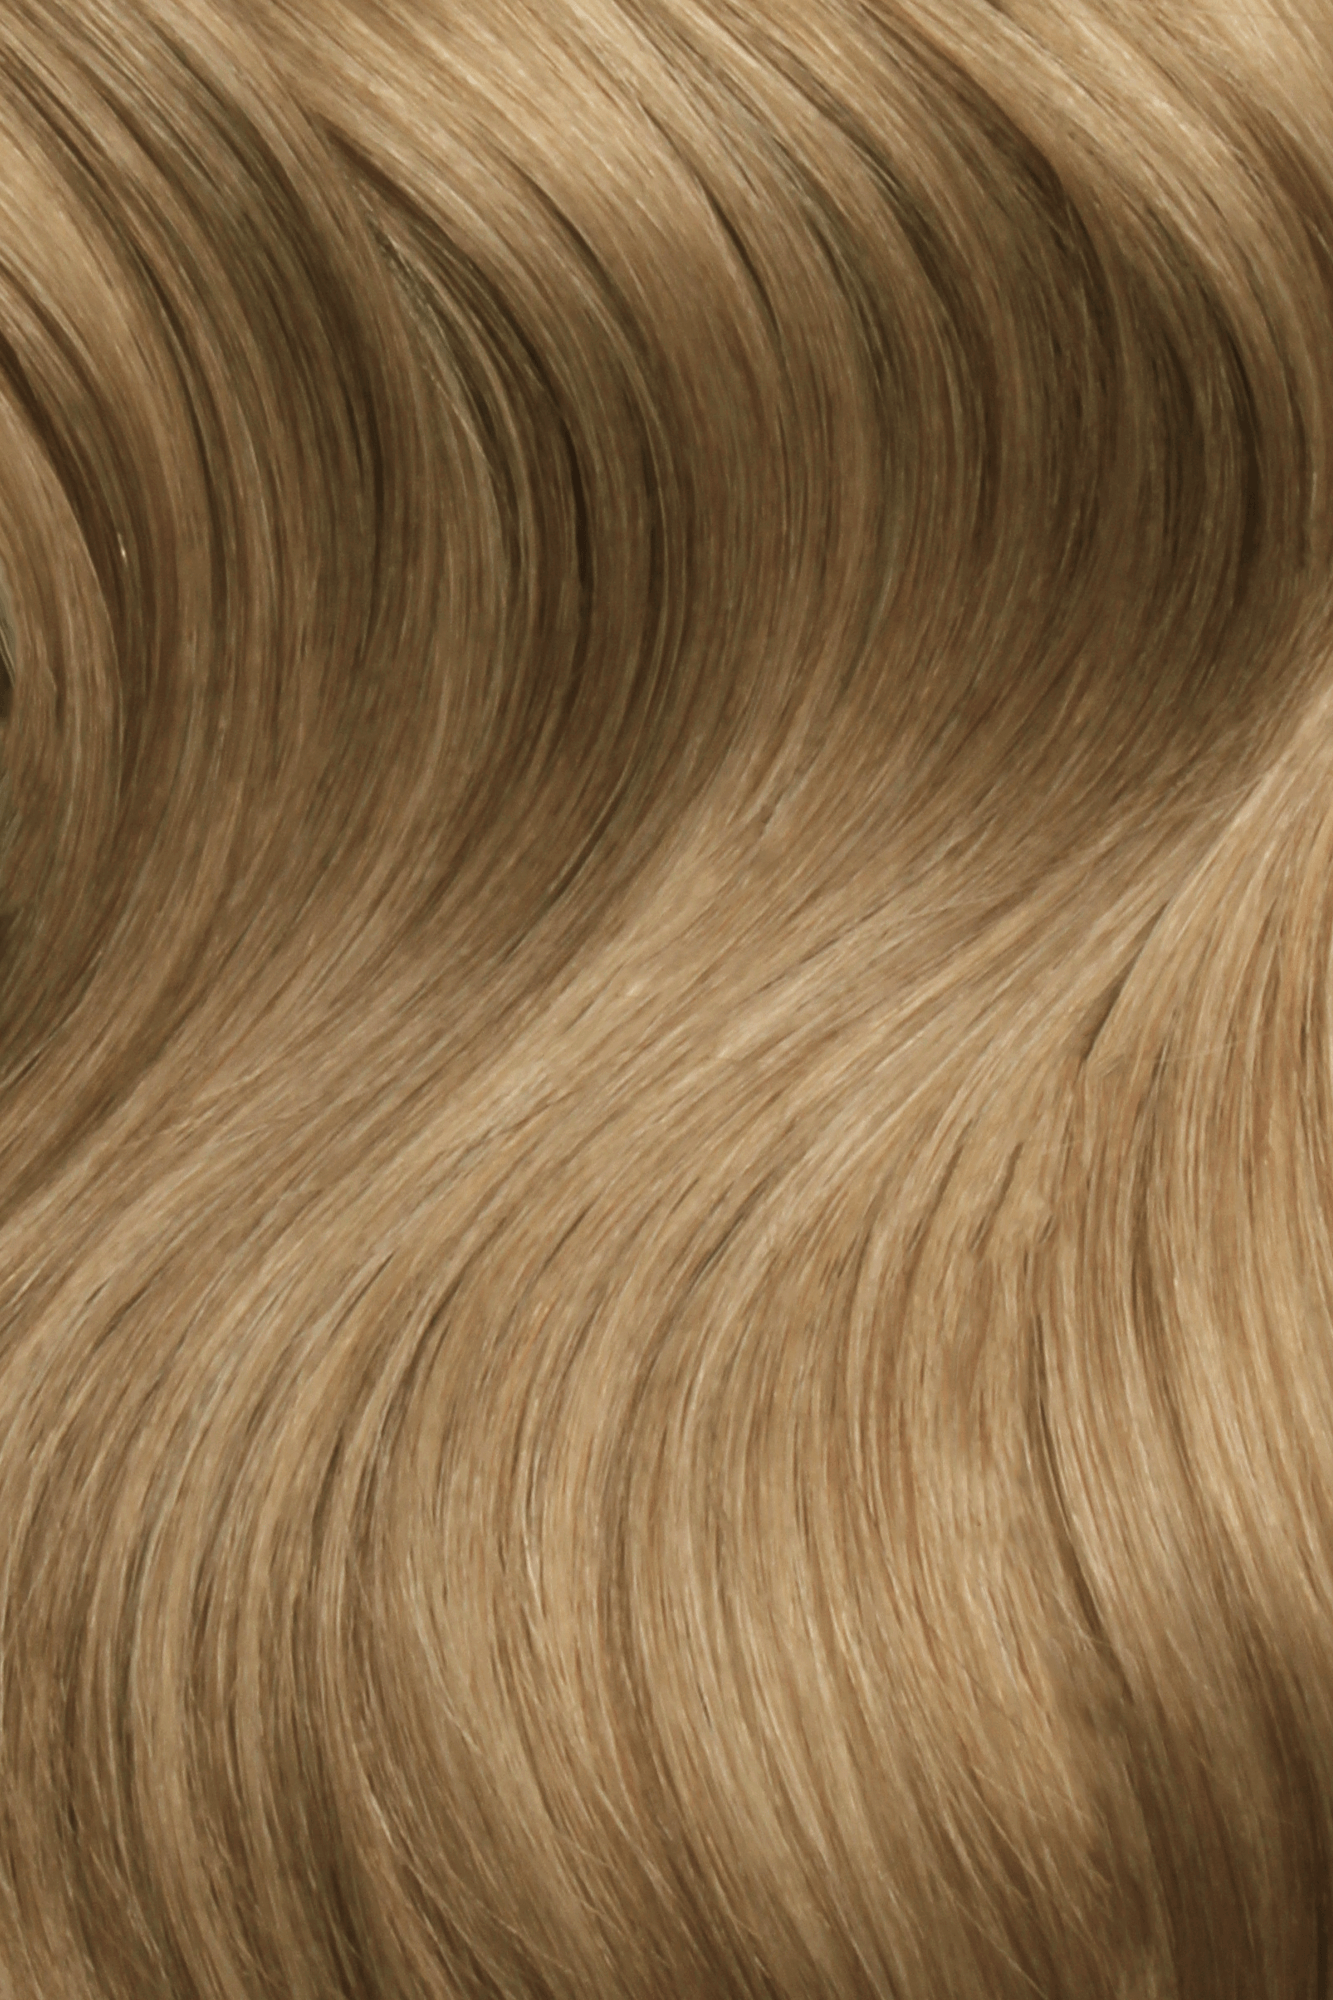 SEAMLESS® Tapes 20 Inches - SWAY Hair Extensions Champagne-Chestnut-8-22 clip-in hair extensions made of 100% Double Drawn, Remy Human Hair. SWAY SEAMLESS® Tapes, 20 inches. Lightweight, flexible, and perfect for any hairstyle.